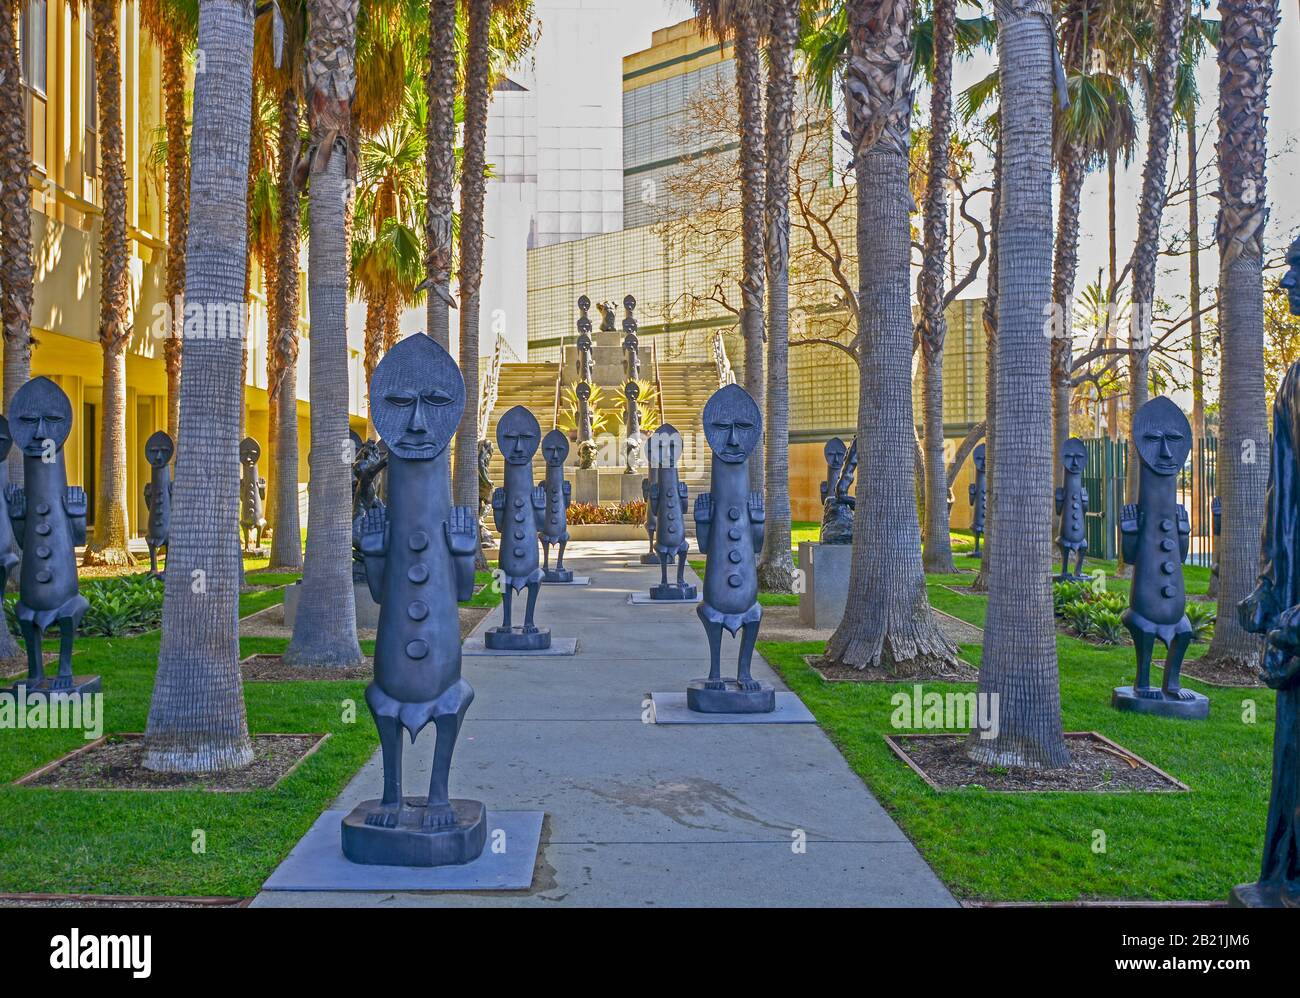 LACMA.  The Invisible Man and the Masque of Blackness, B. Gerald Cantor Sculpture Garden at the Los Angeles County Museum of Art, Los Angeles, Stock Photo